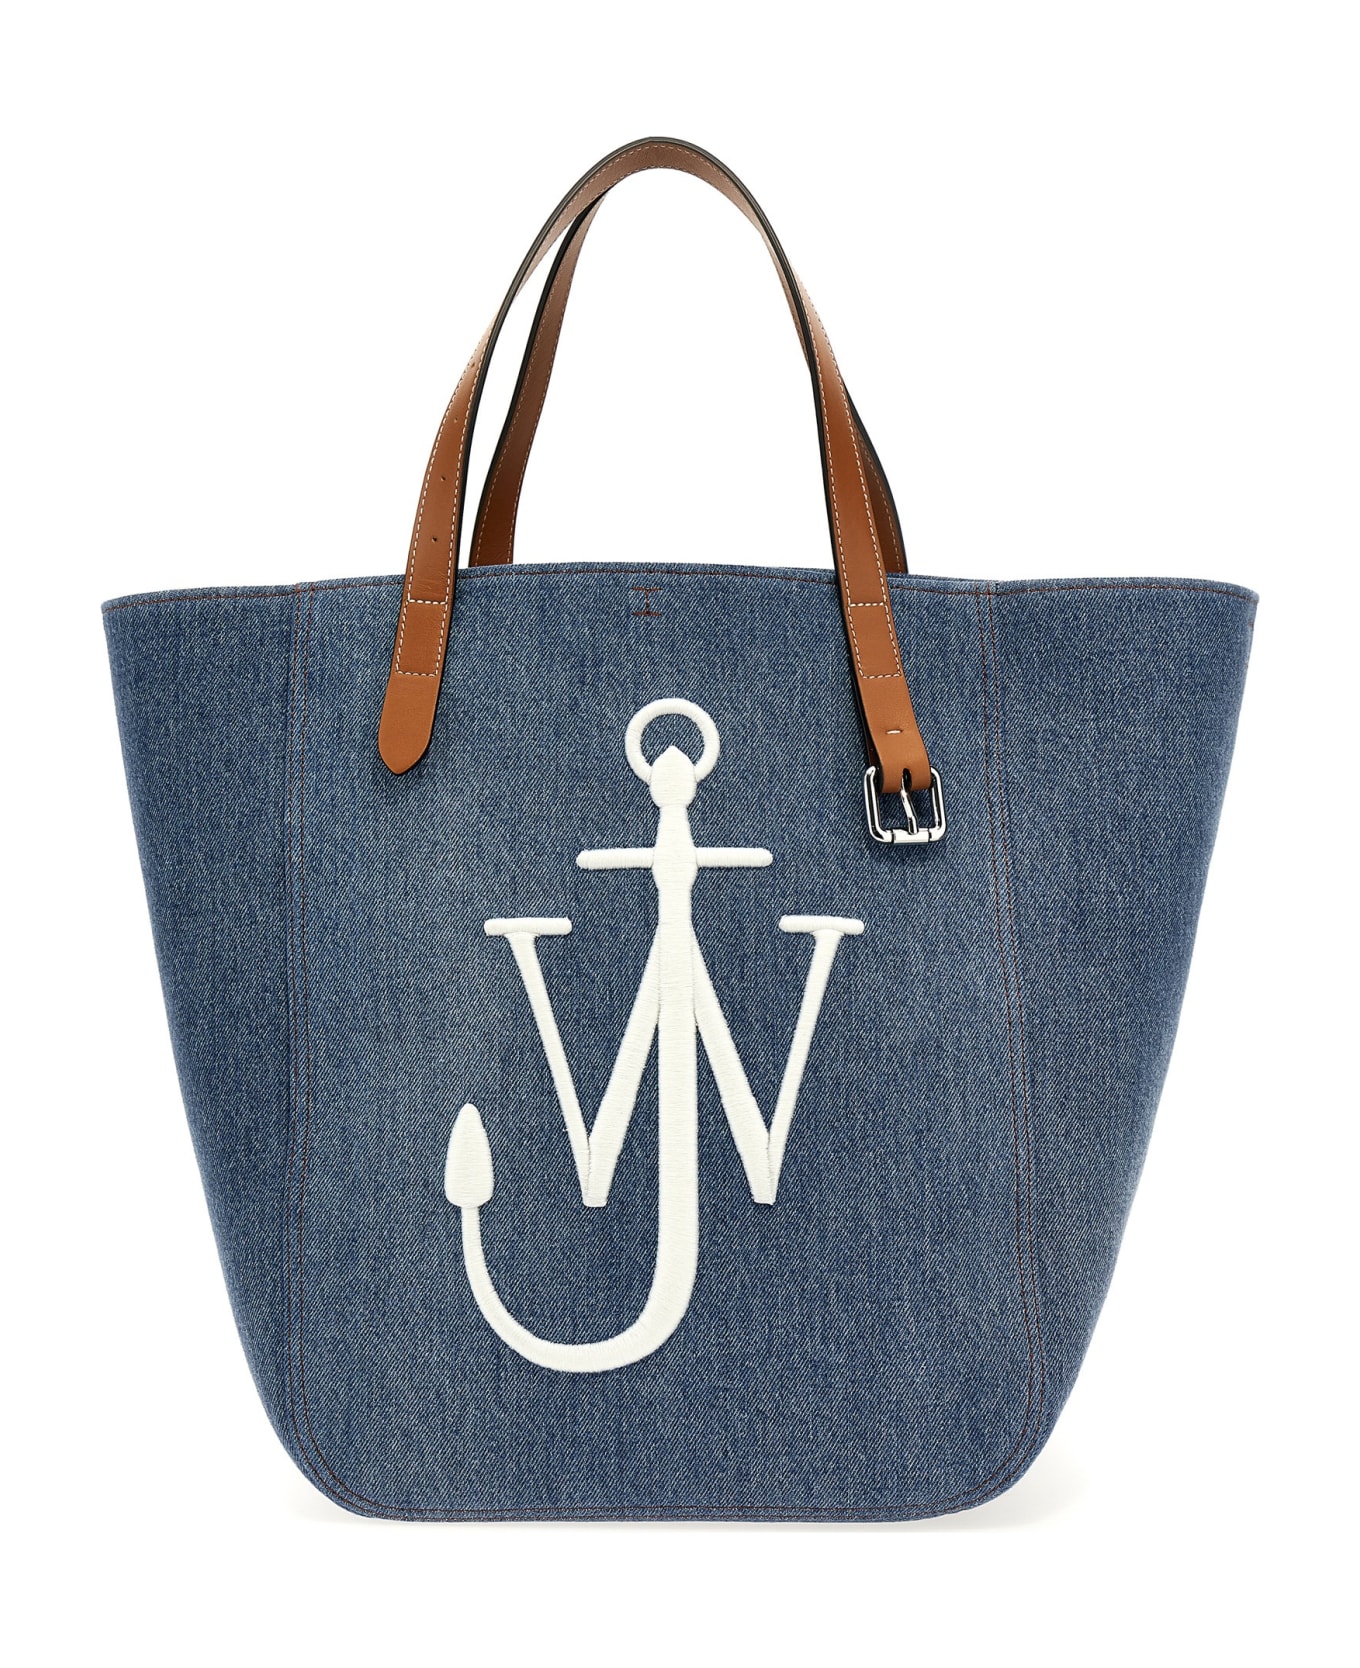 J.W. Anderson 'belt Tote Cabas' Shopping Bag - Blue トートバッグ